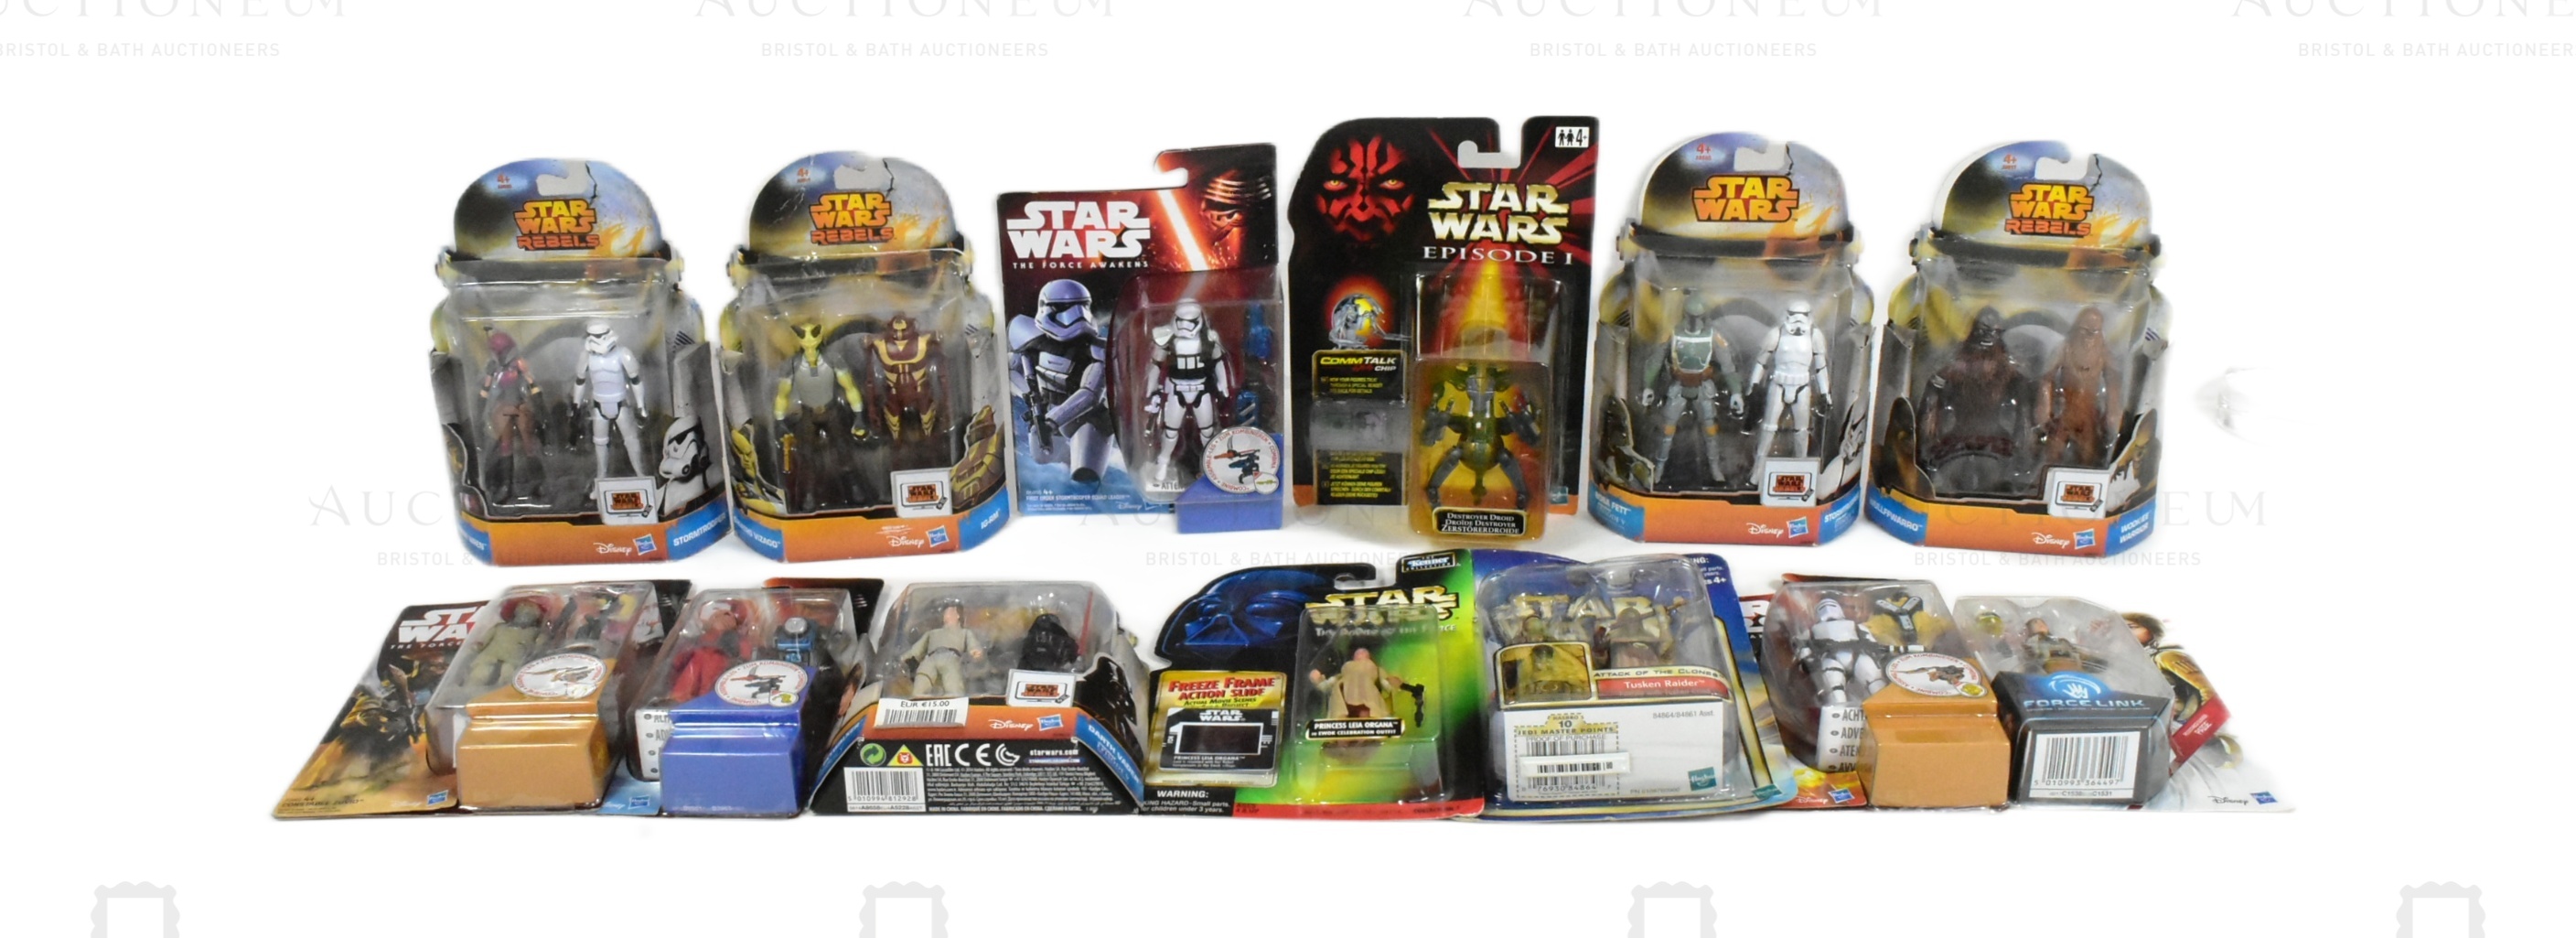 STAR WARS - COLLECTION OF CARDED ACTION FIGURES